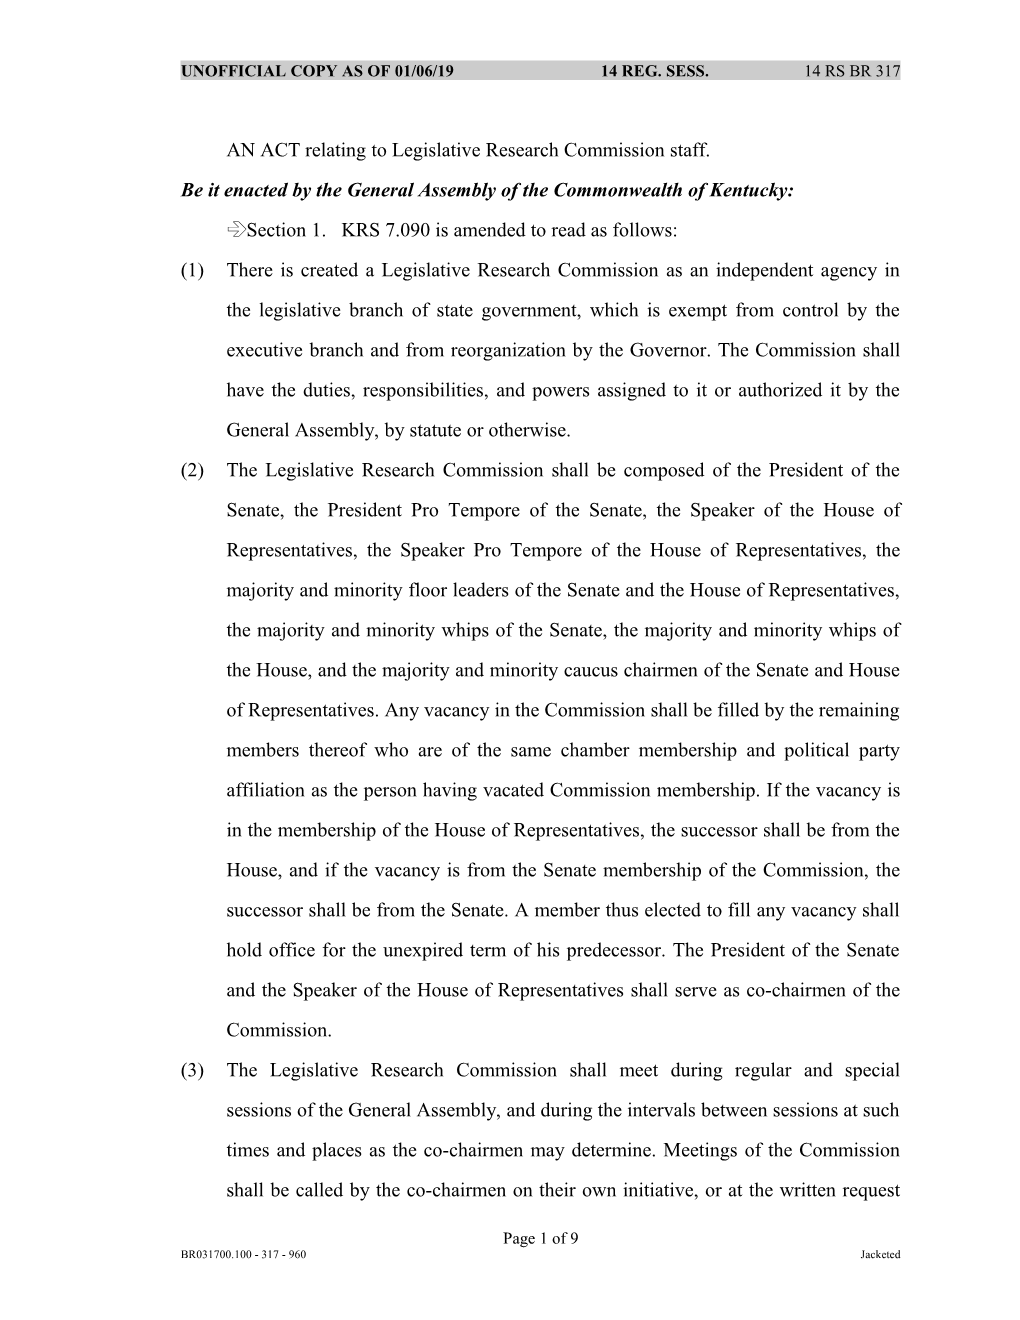 AN ACT Relating to Legislative Research Commission Staff